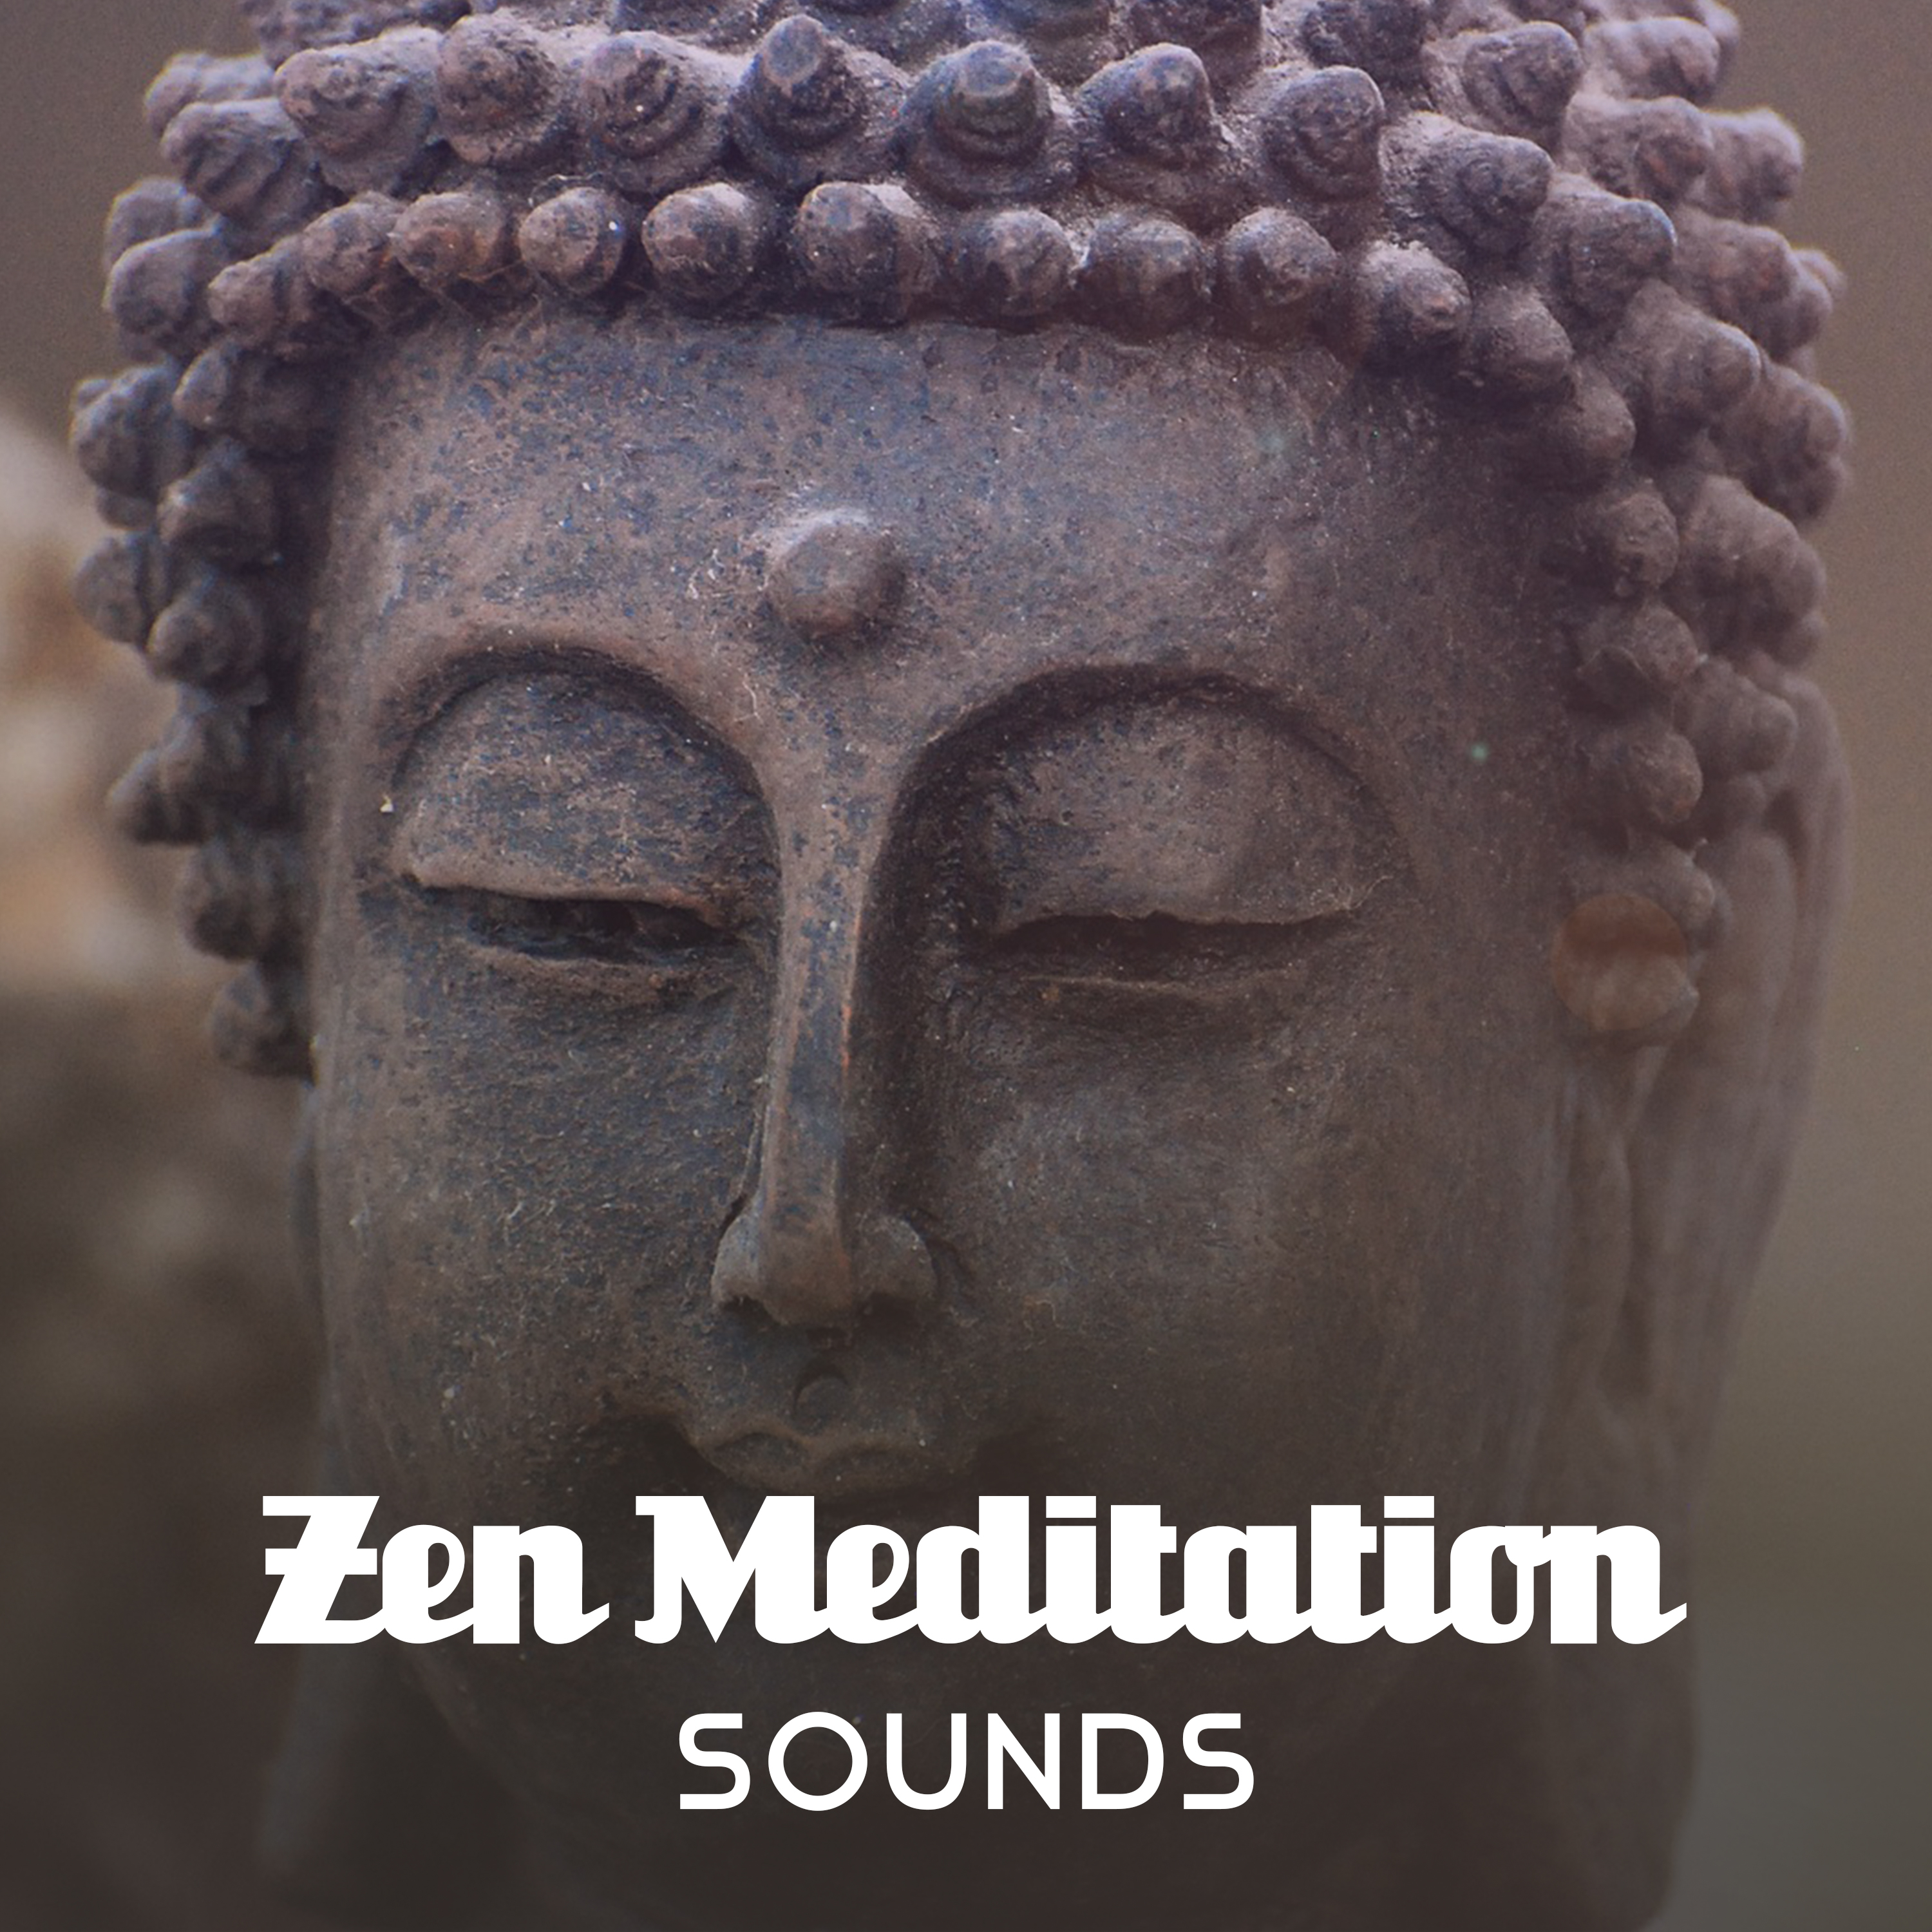 Zen Meditation Sounds – Relaxing Music to Calm Down, Meditate in Peace, Soothing Waves, Chilled Mind